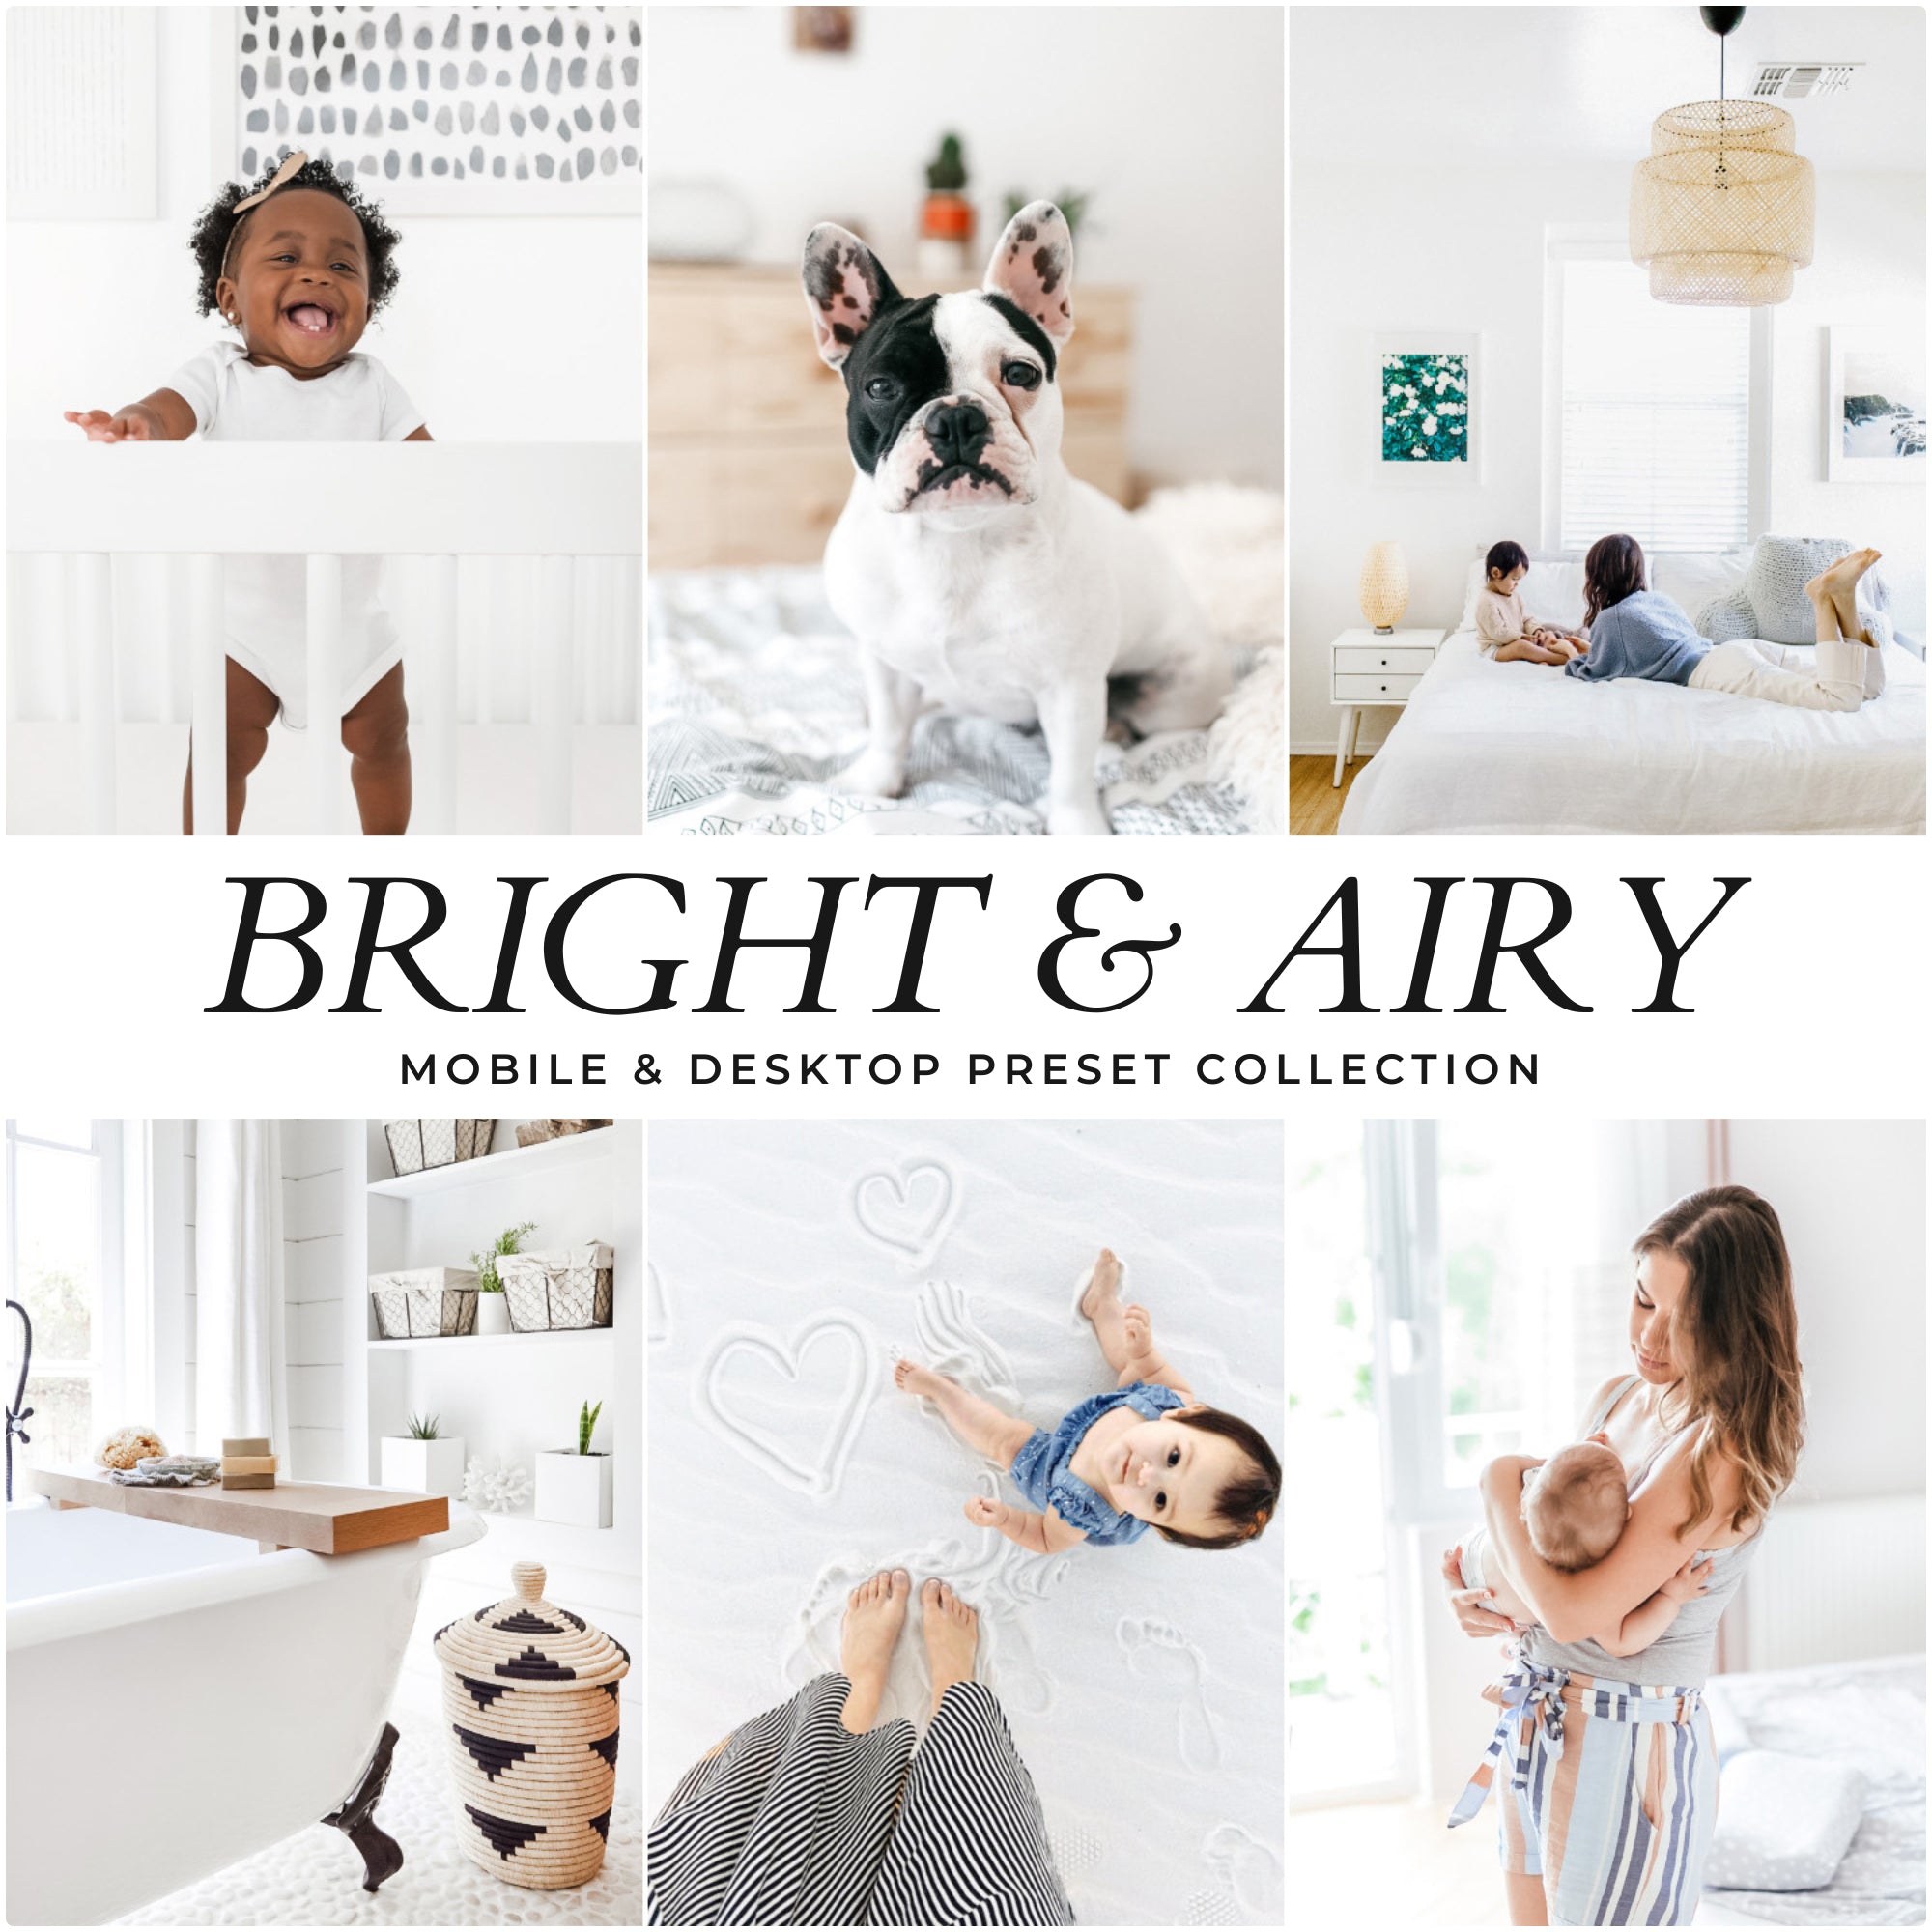 Bright And Airy Lightroom Presets The Best Instagram Influencer and Blogger Presets by Lou And marks Presets